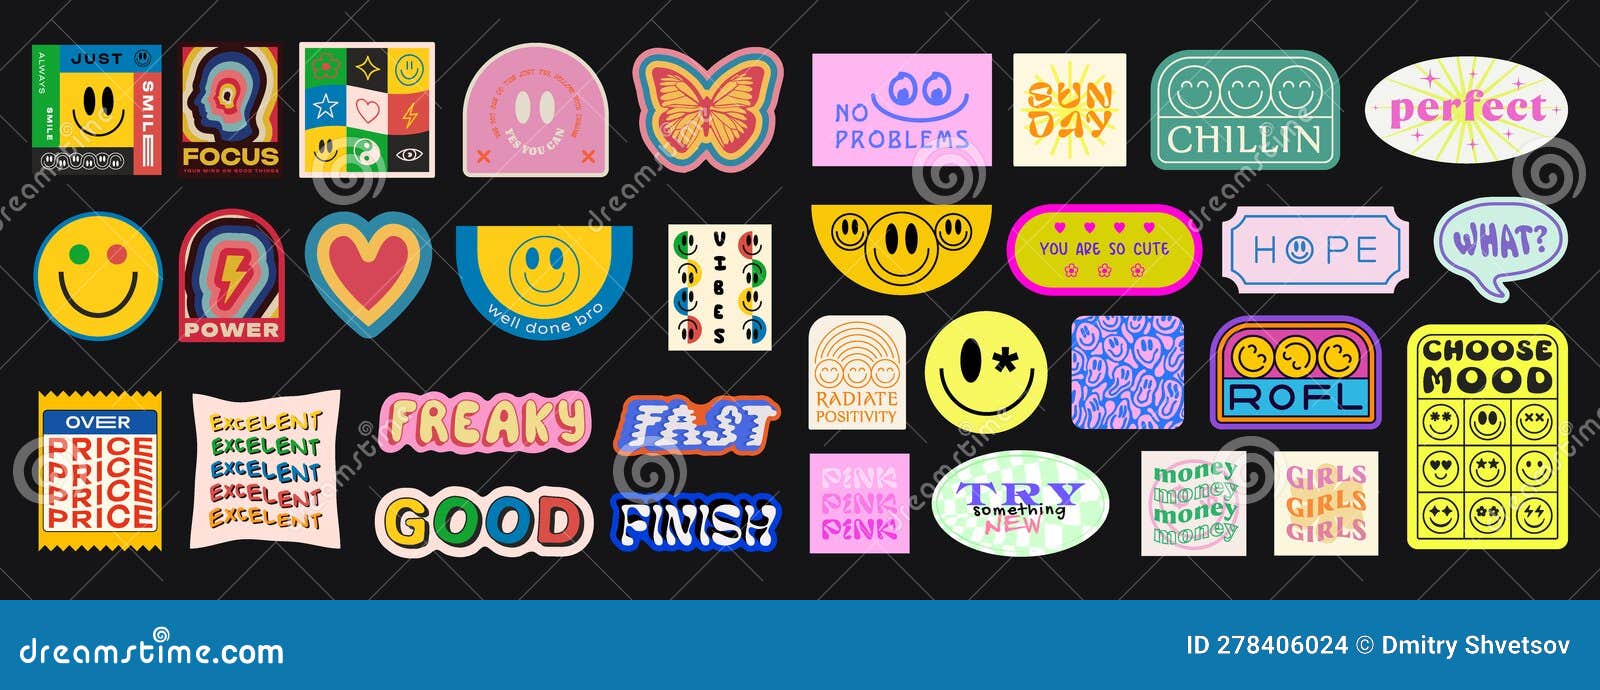 Cool Trendy Geometric Smile Stickers Set. Collection of Groovy Patches ...